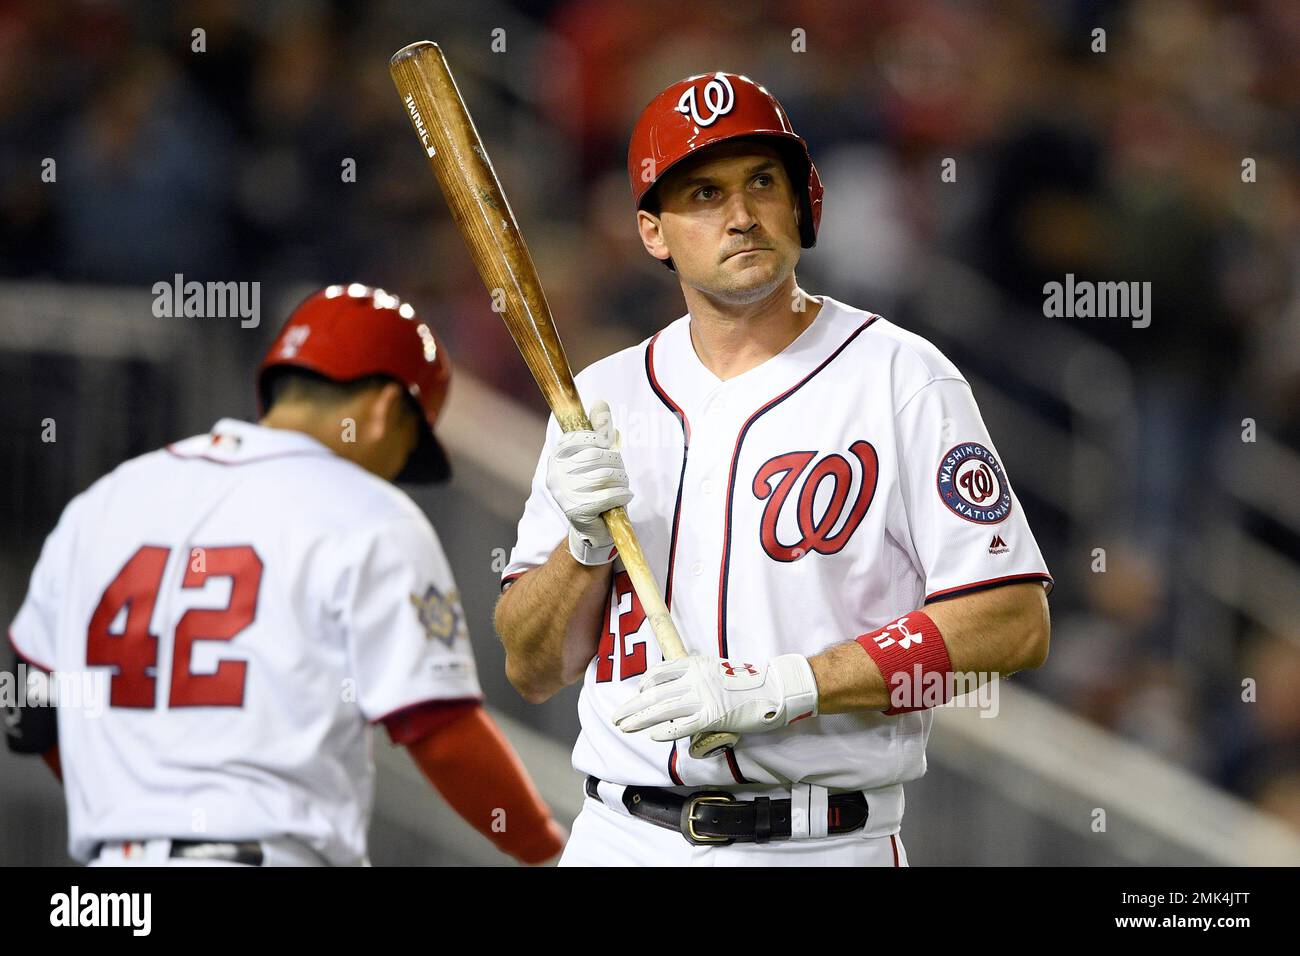 Washington Nationals' Ryan Zimmerman stands on the field after he struck  out during a baseball game against the San Francisco Giants, Tuesday, April  16, 2019, in Washington. The Giants won 7-3. (AP